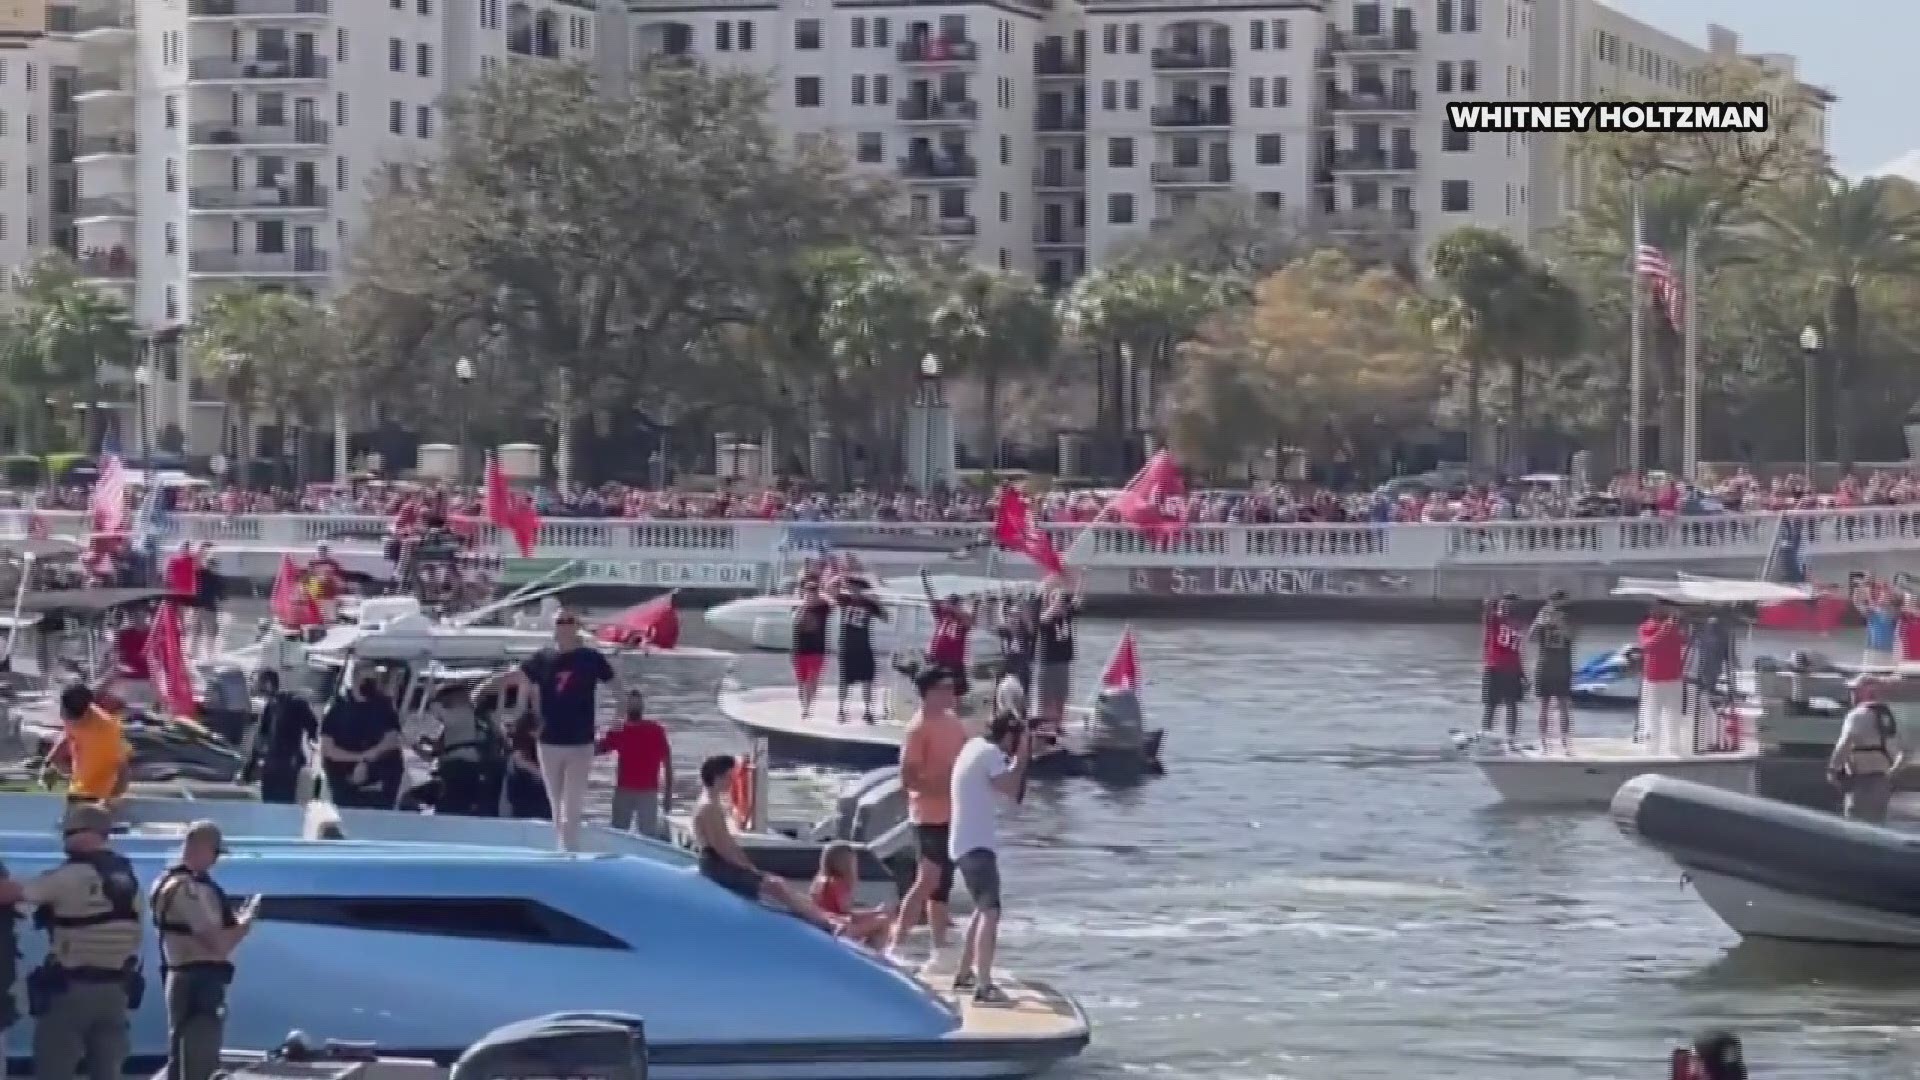 During the Super Bowl LV boat parade, Brady made a daring toss with the Vince Lombardi Trophy